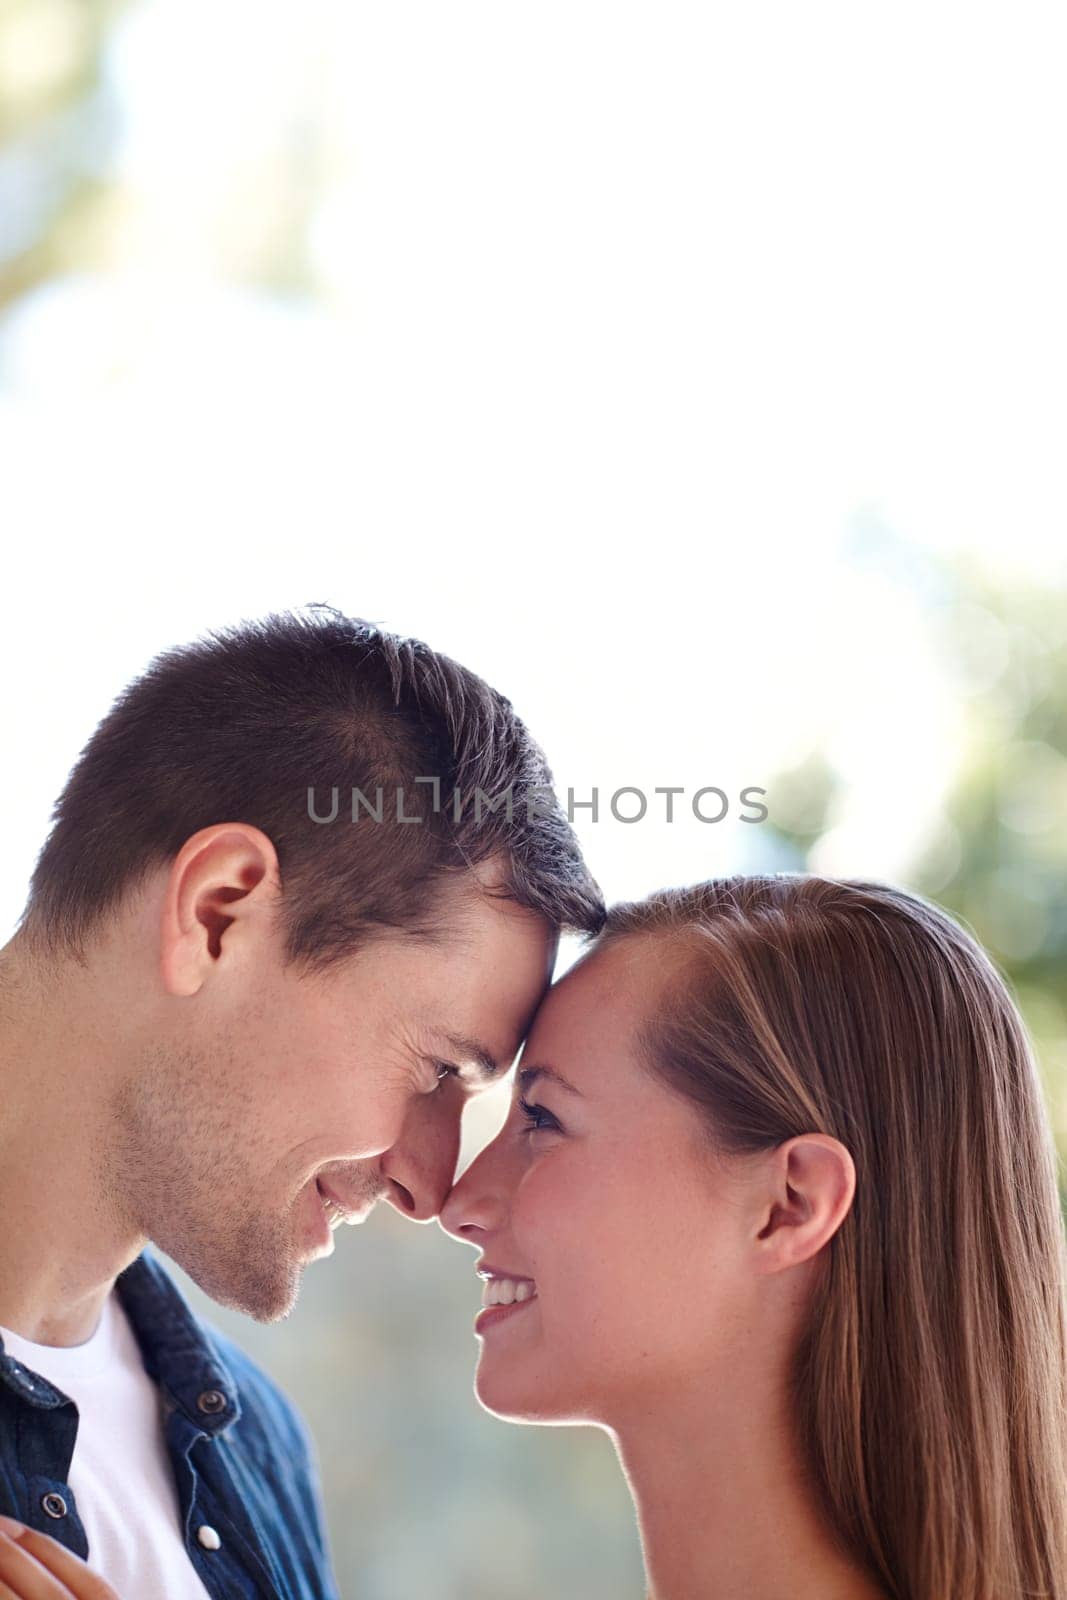 Theyre ready for forever. A young couple sharing an intimate moment outdoors